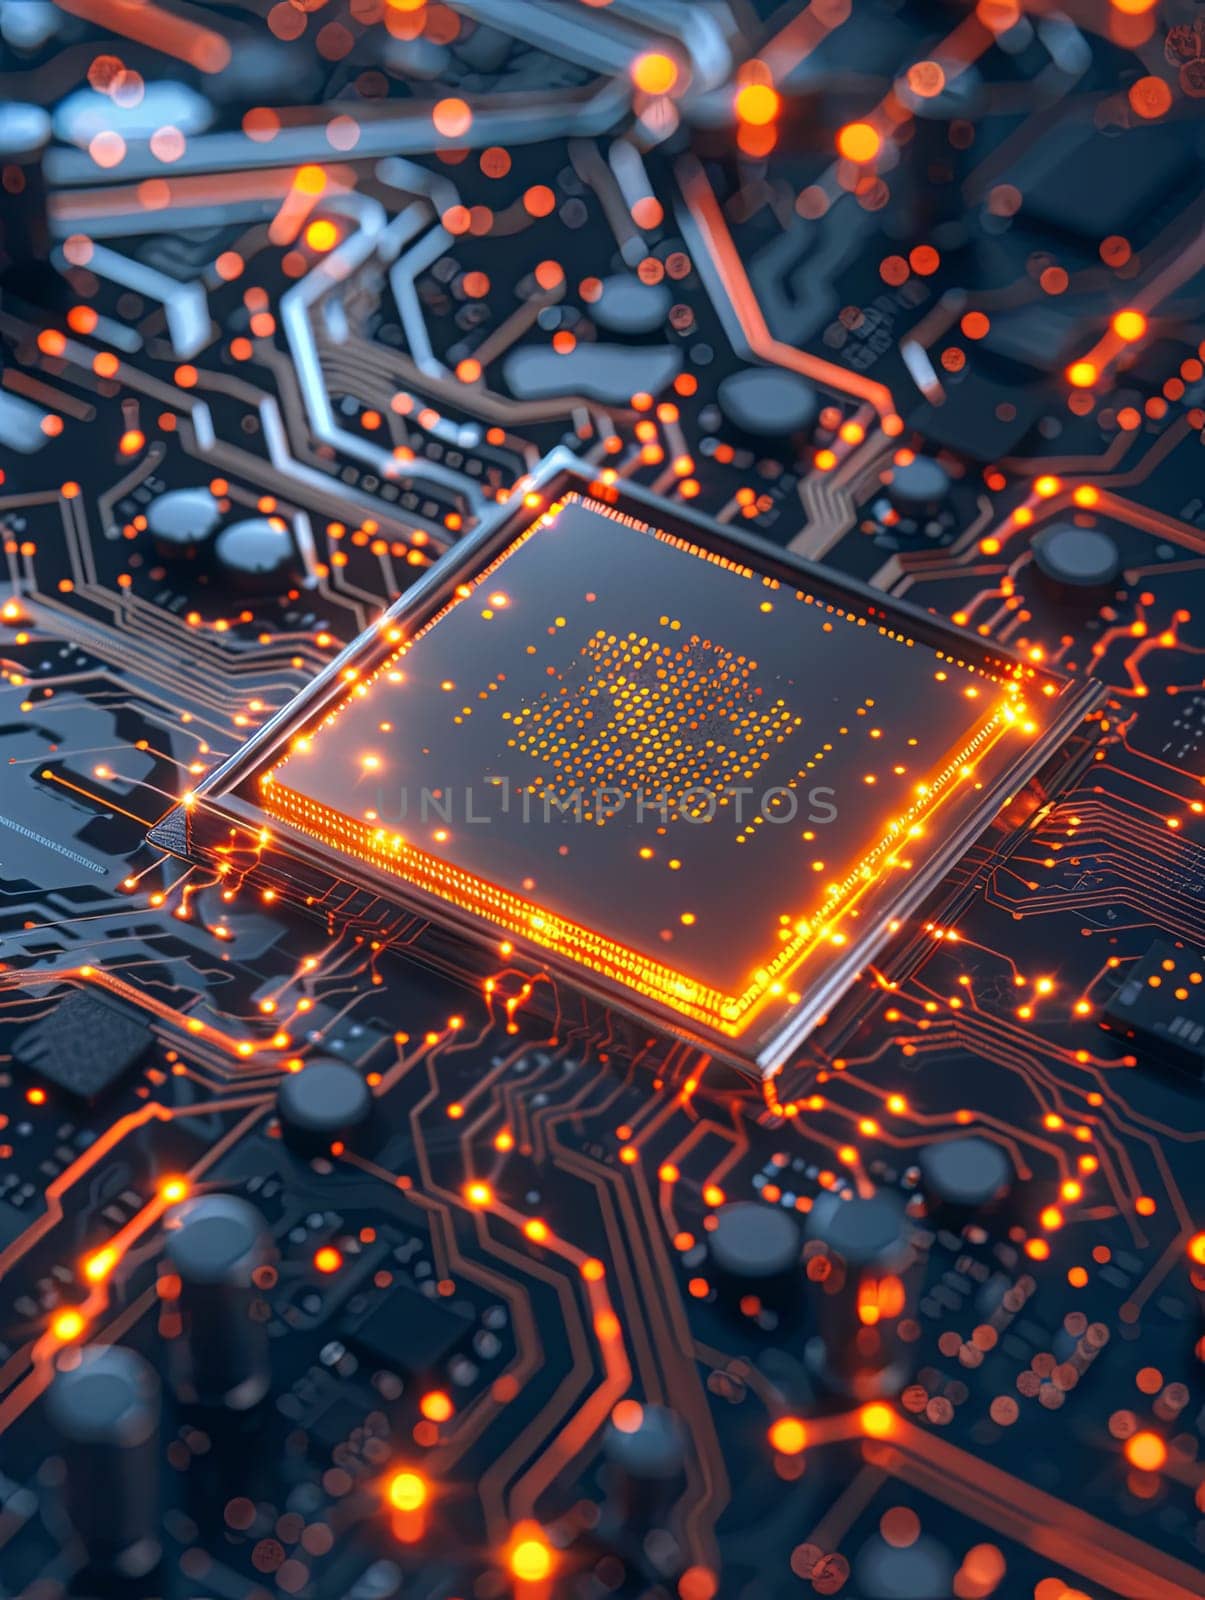 A close-up image showcasing a modern microprocessor on a motherboard, surrounded by intricate digital data streams and glowing light effects.